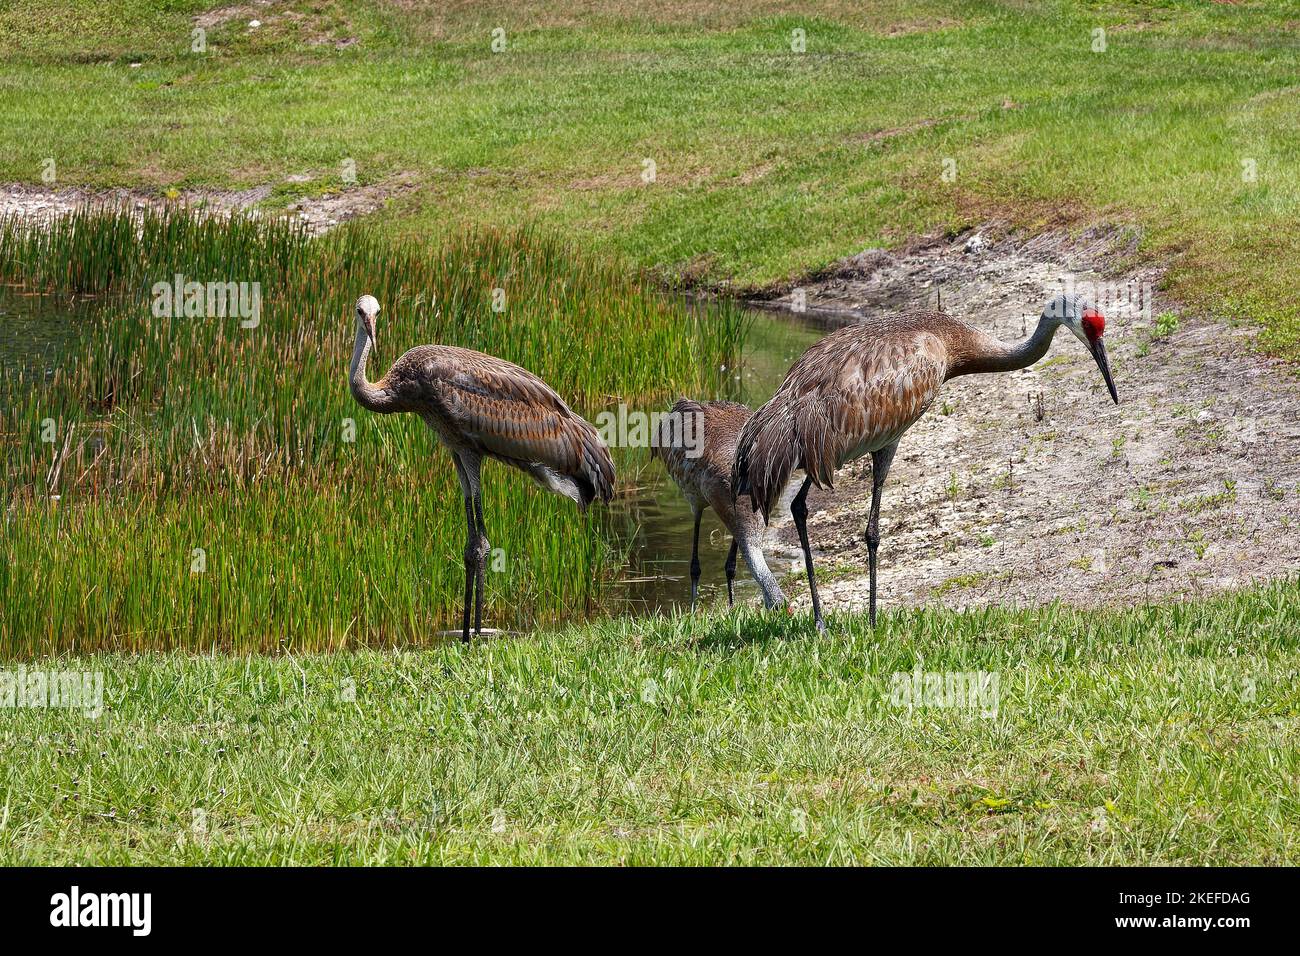 3 Sandhill Cranes, standing beside pond, wild grass, water, very large bird, 2 mature, 1 immature, Grus canadensis, red forehead, tufted rump feathers Stock Photo